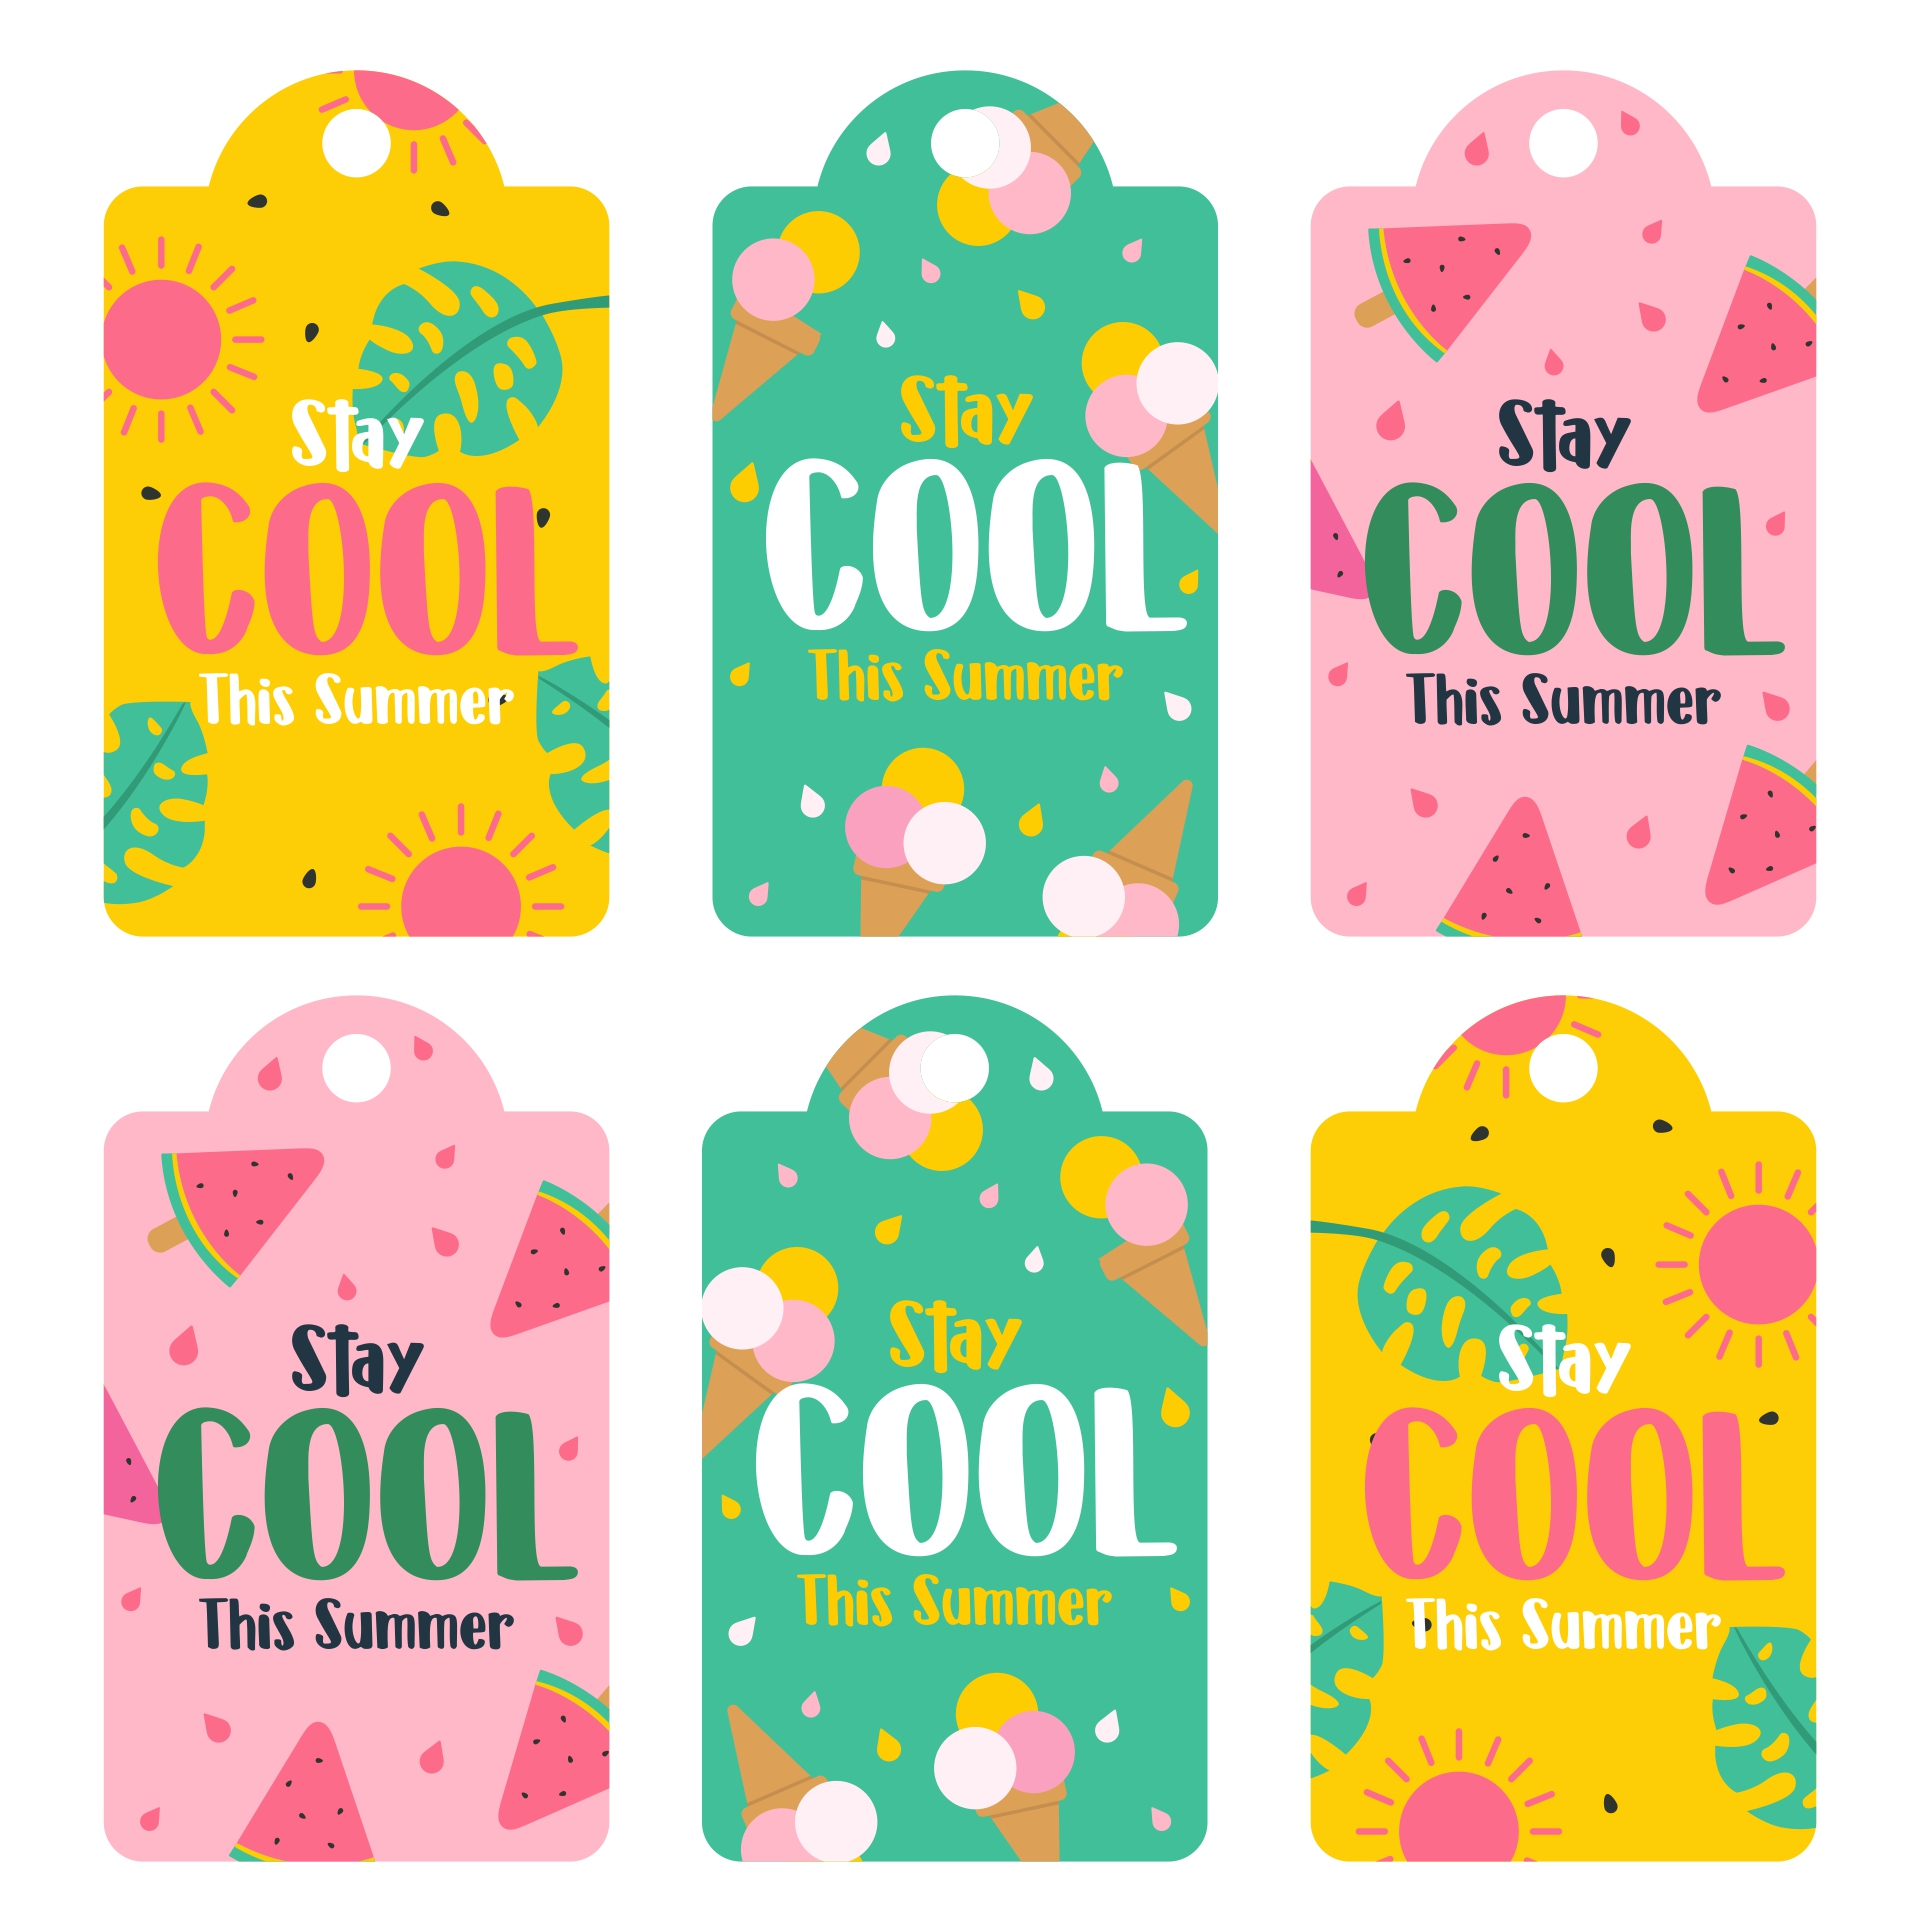 Stay-Cool This Summer Printable